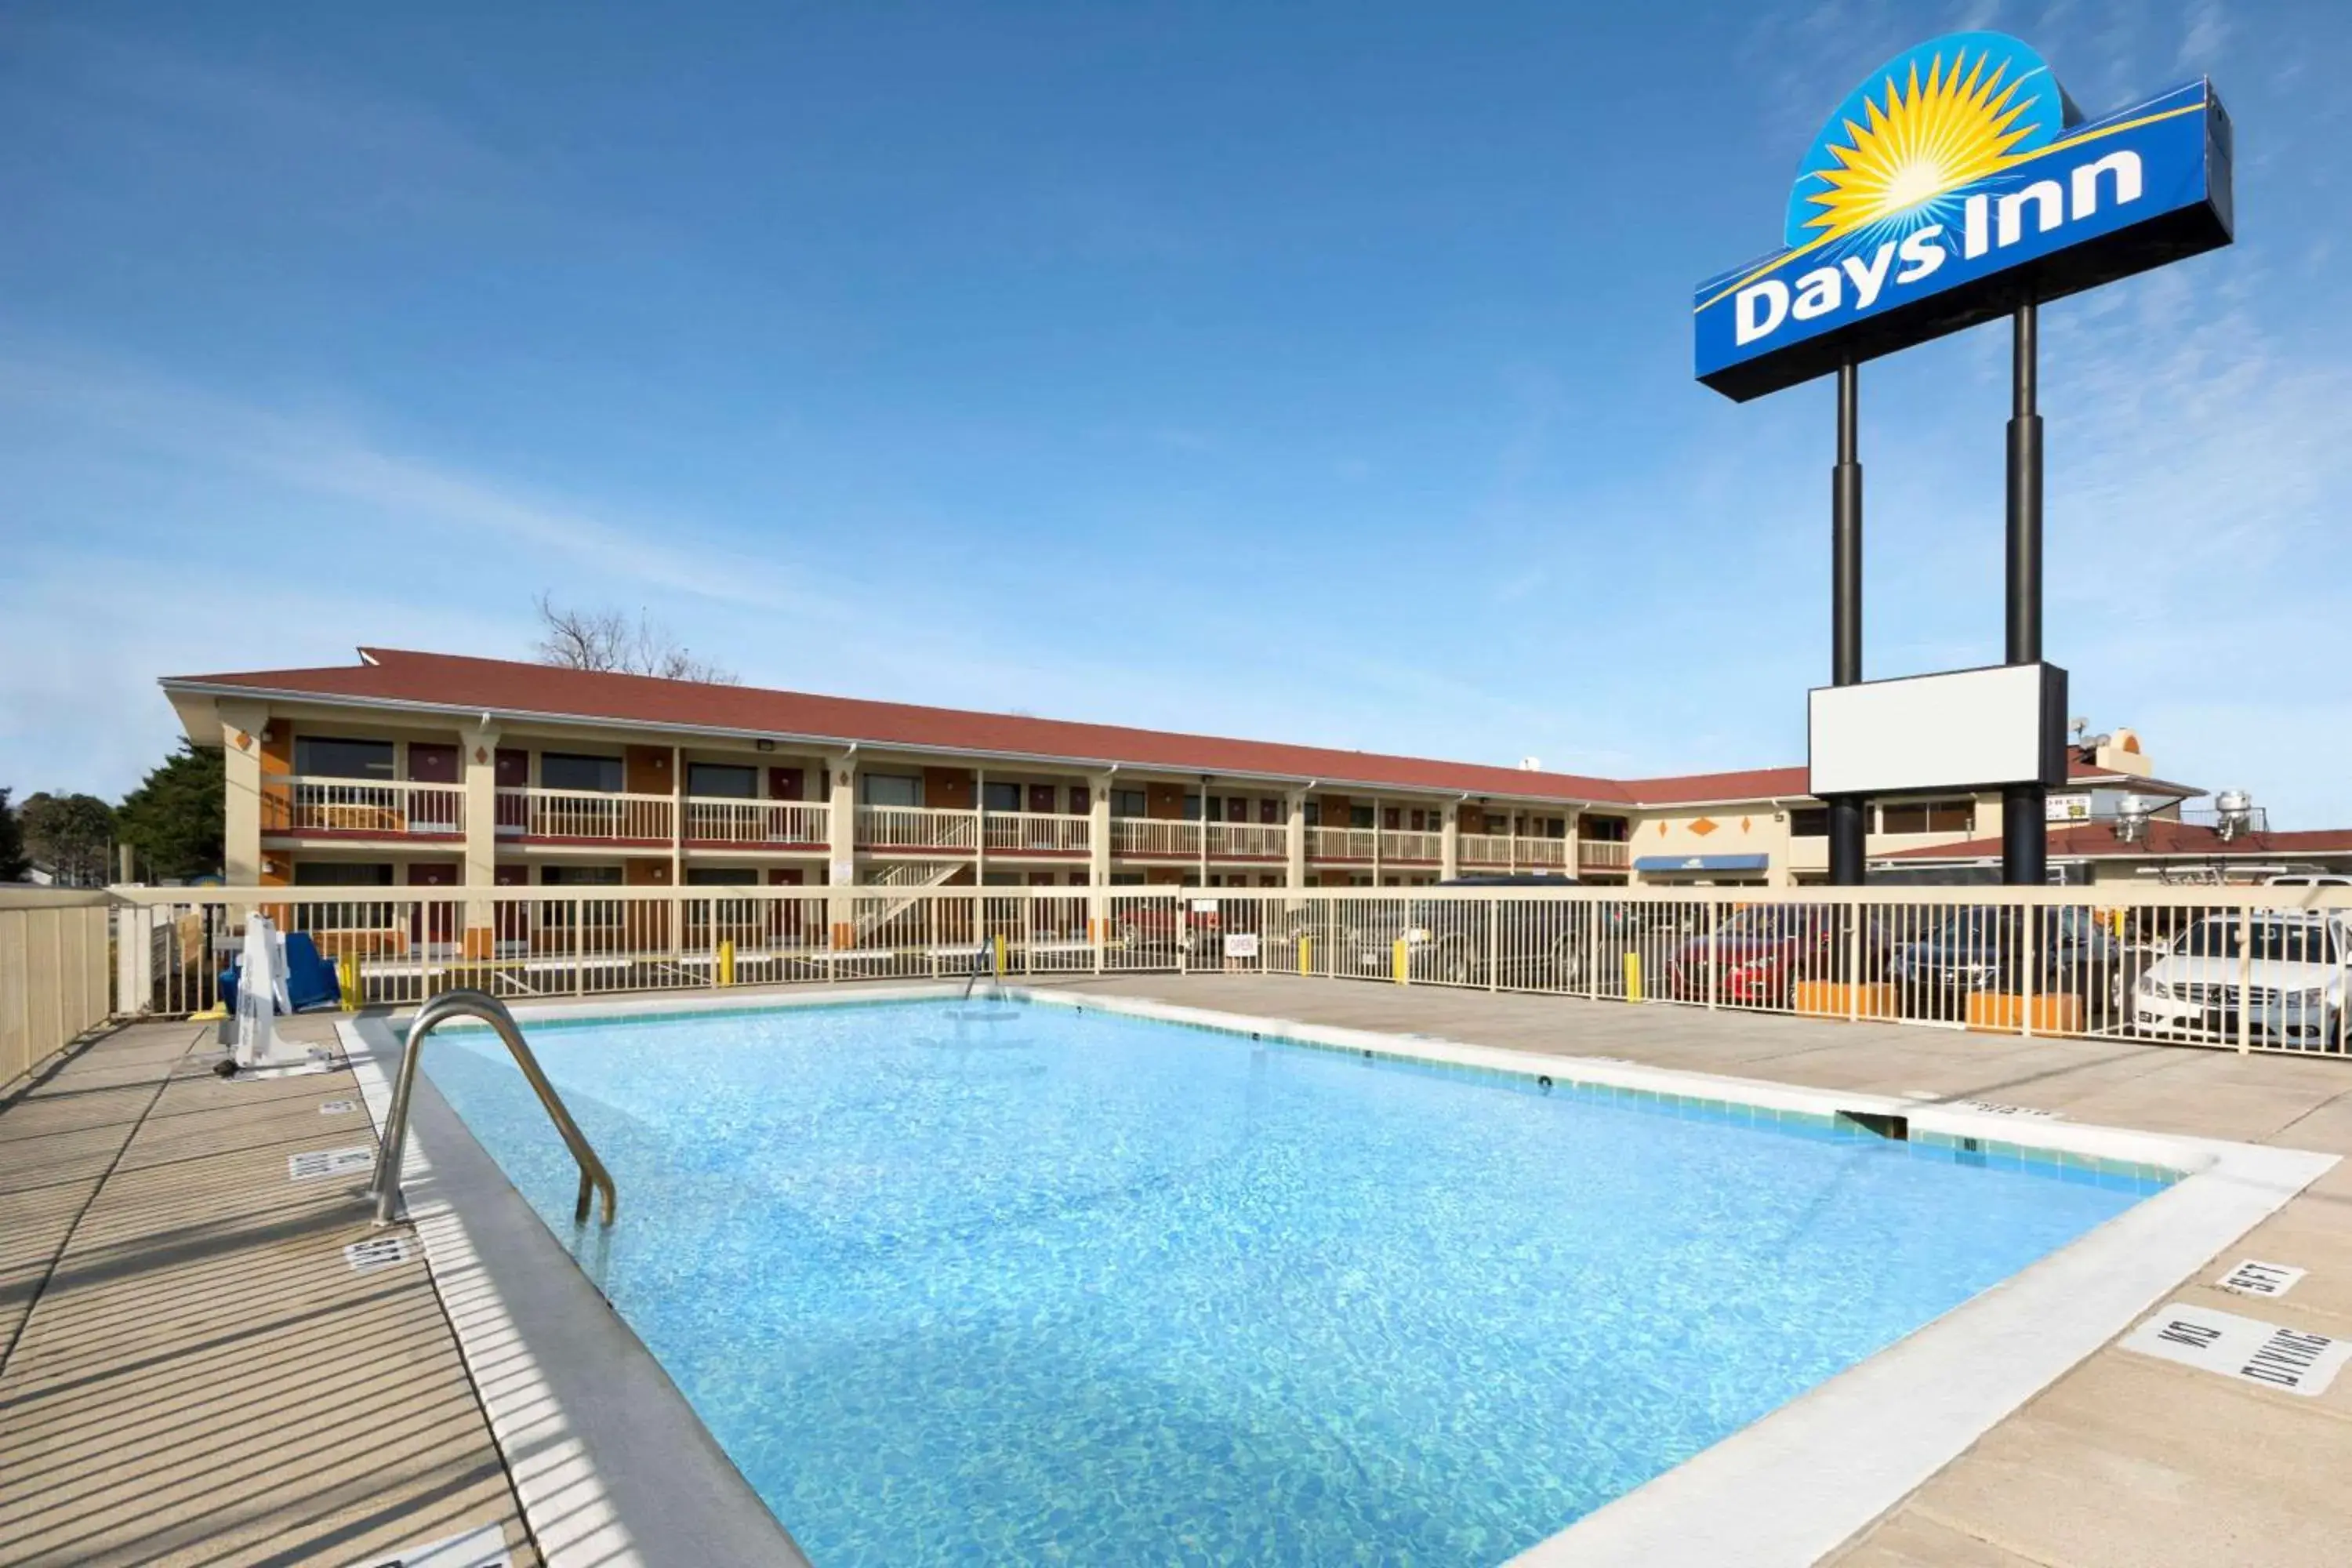 On site, Swimming Pool in Days Inn by Wyndham Jacksonville NC